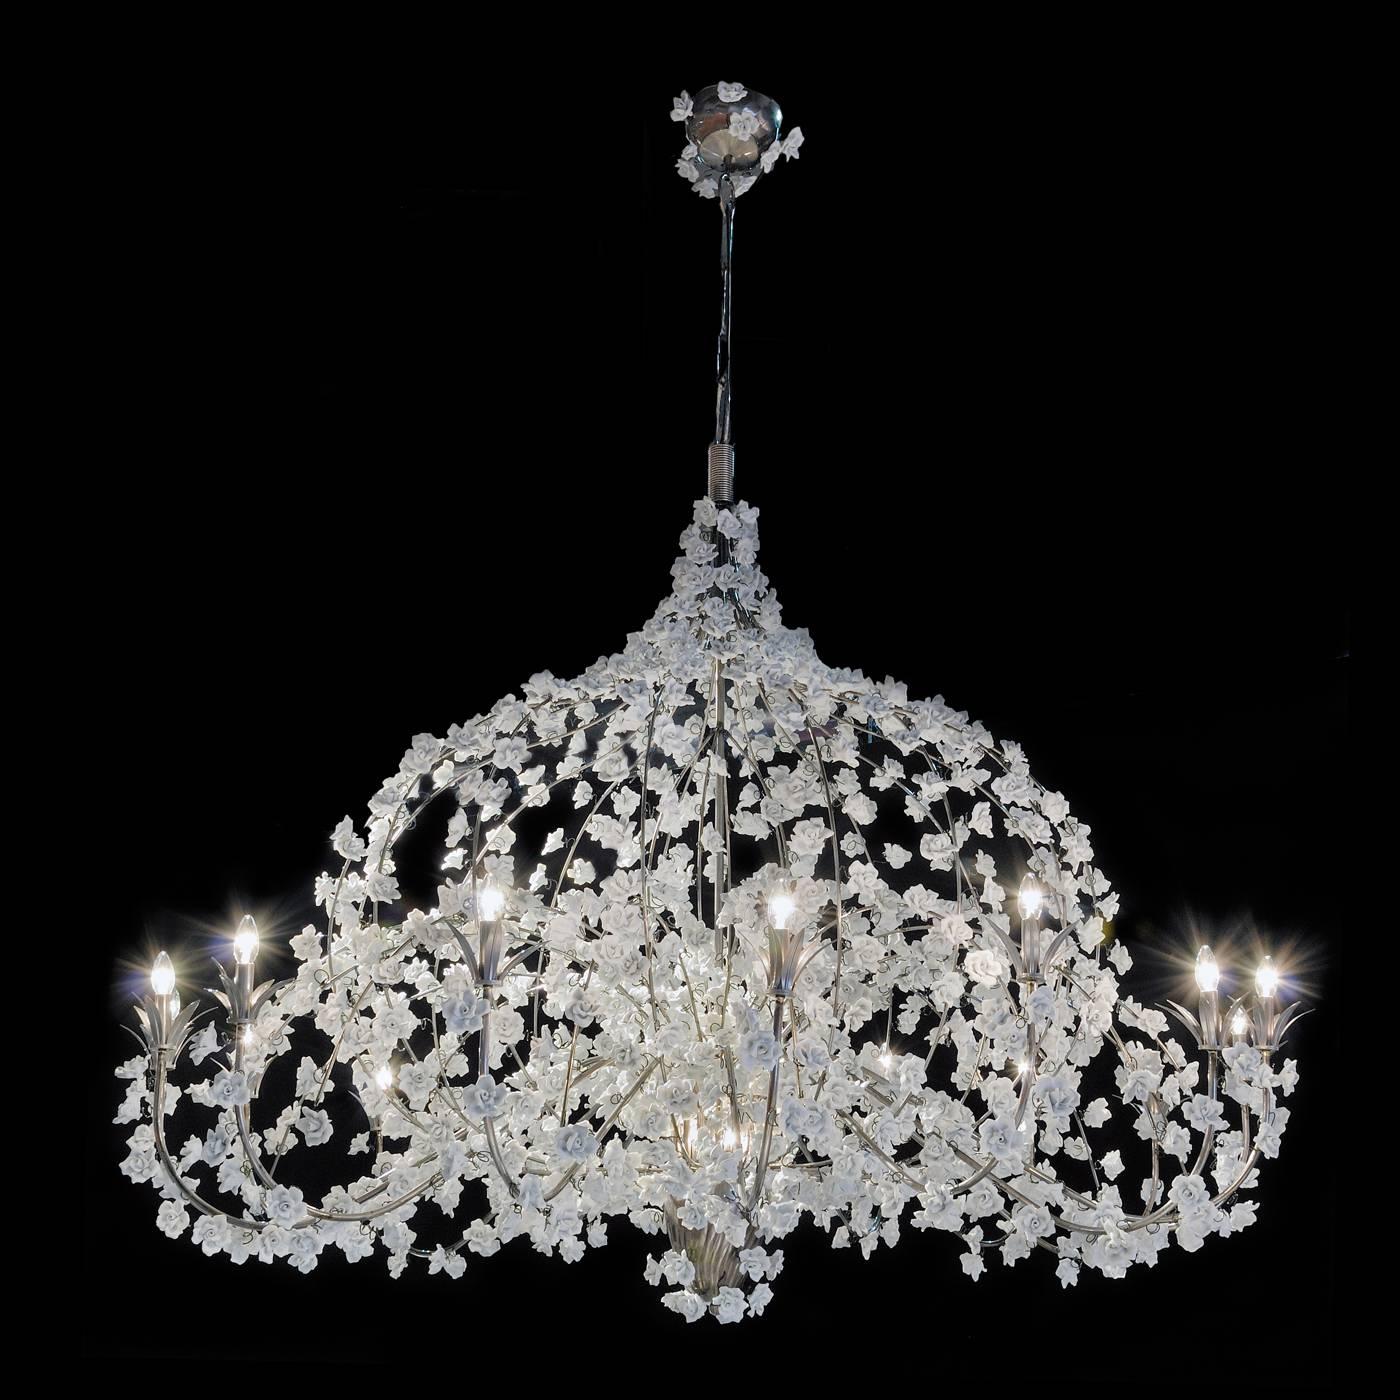 This luxurious chandelier is a true work of art featuring a polished metal structure covered in over 1,600 handcrafted pure white porcelain roses, the pure white shade achieved through a unique porcelain firing process. This piece was designed for